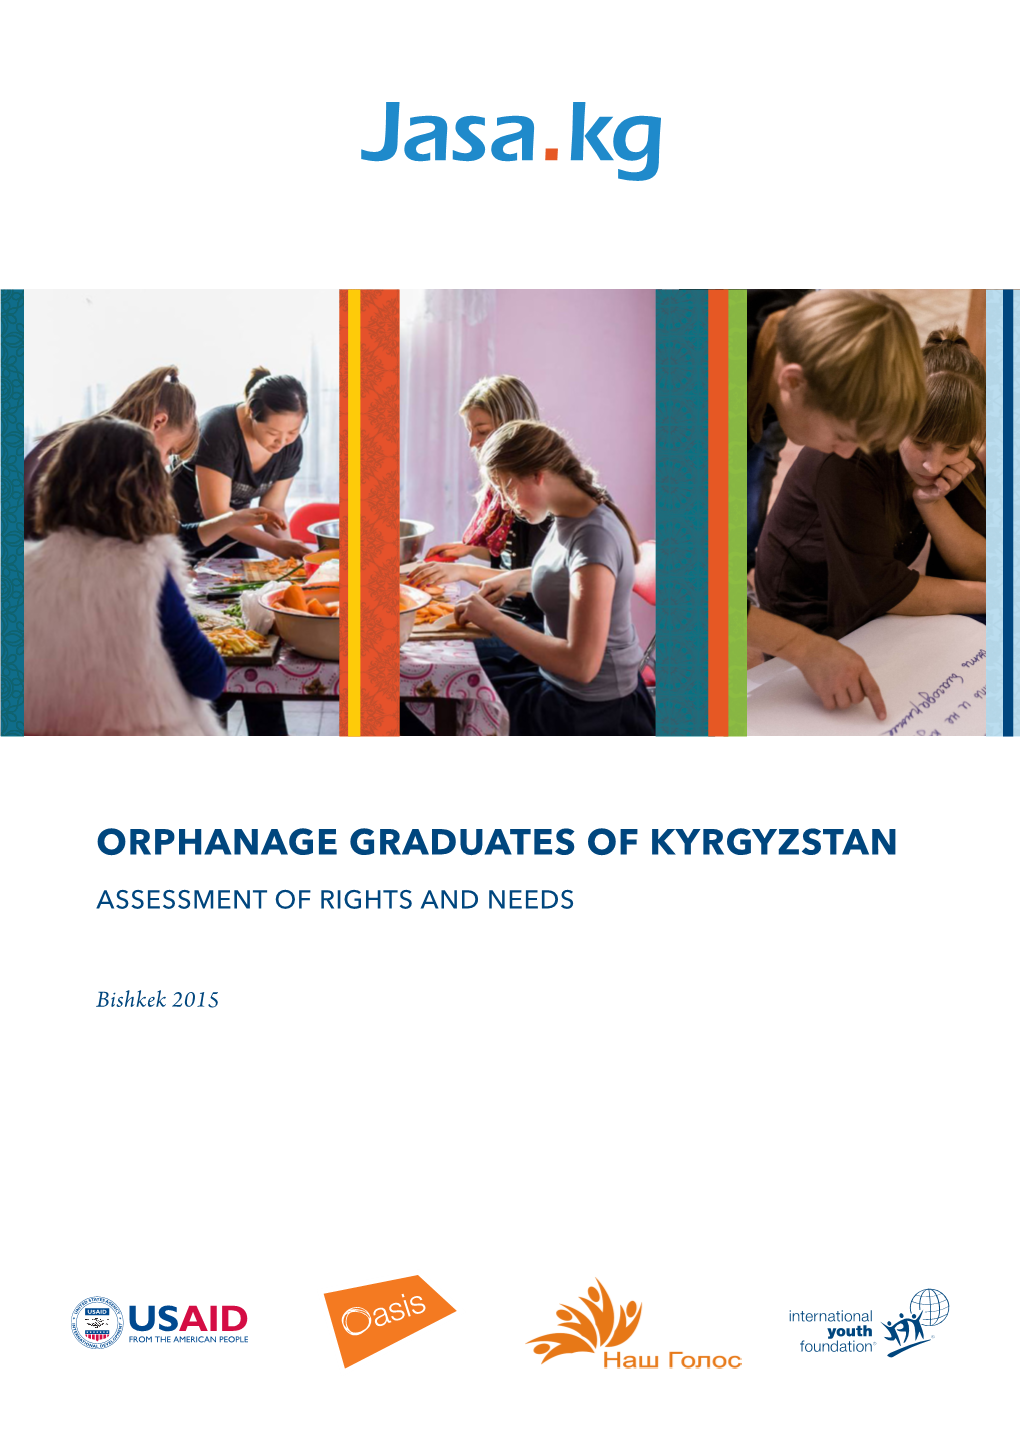 Orphanage Graduates of Kyrgyzstan. Assessment of Rights and Needs. 2015